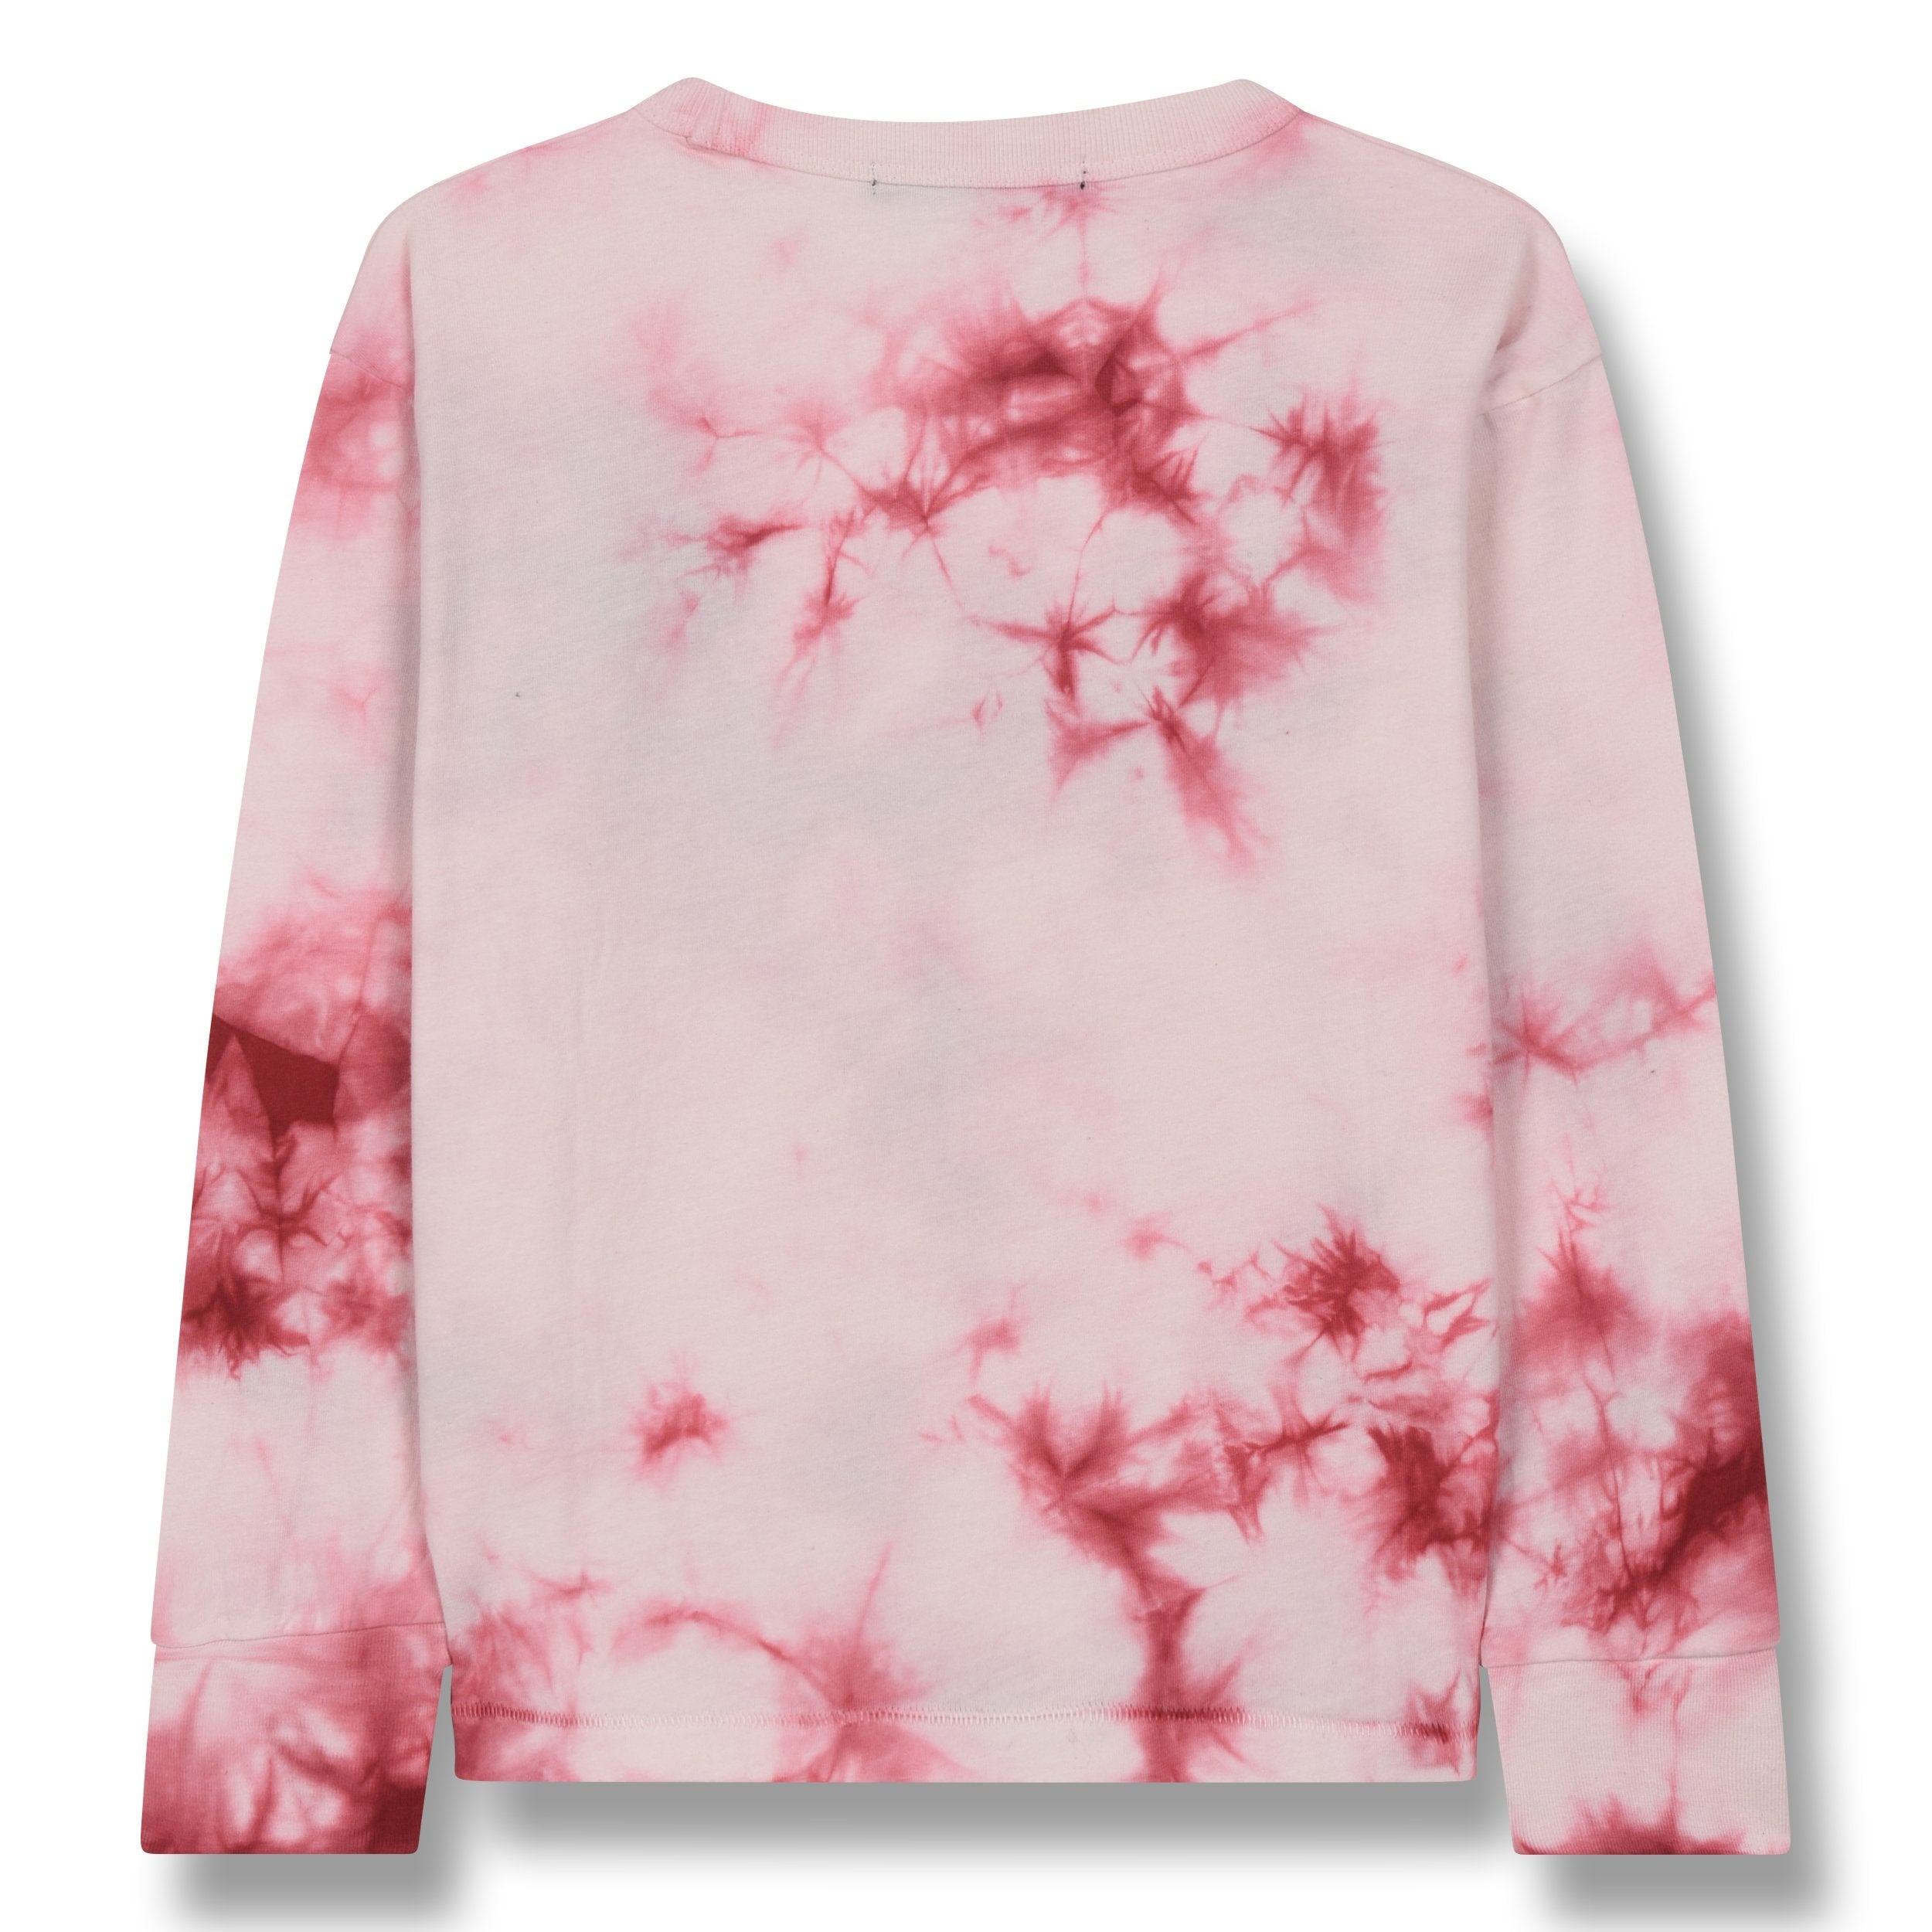 SHINE OLD PINK LUCKY GIRL-TOPS & T-SHIRTS-FINGER IN THE NOSE-Maralex Paris (4173183877183)